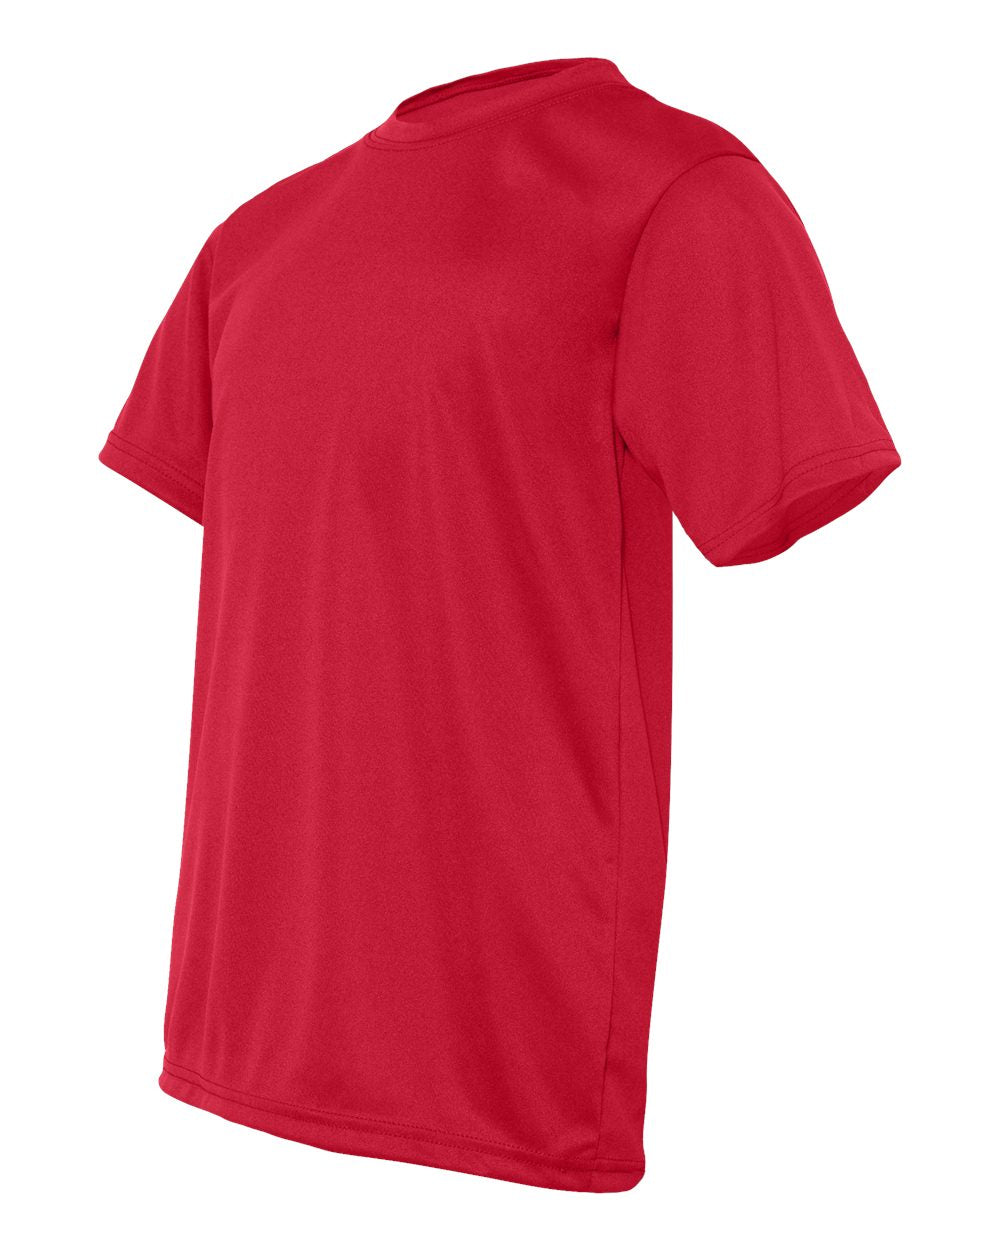 C2 Sport Youth Performance T-Shirt 5200 #color_Red